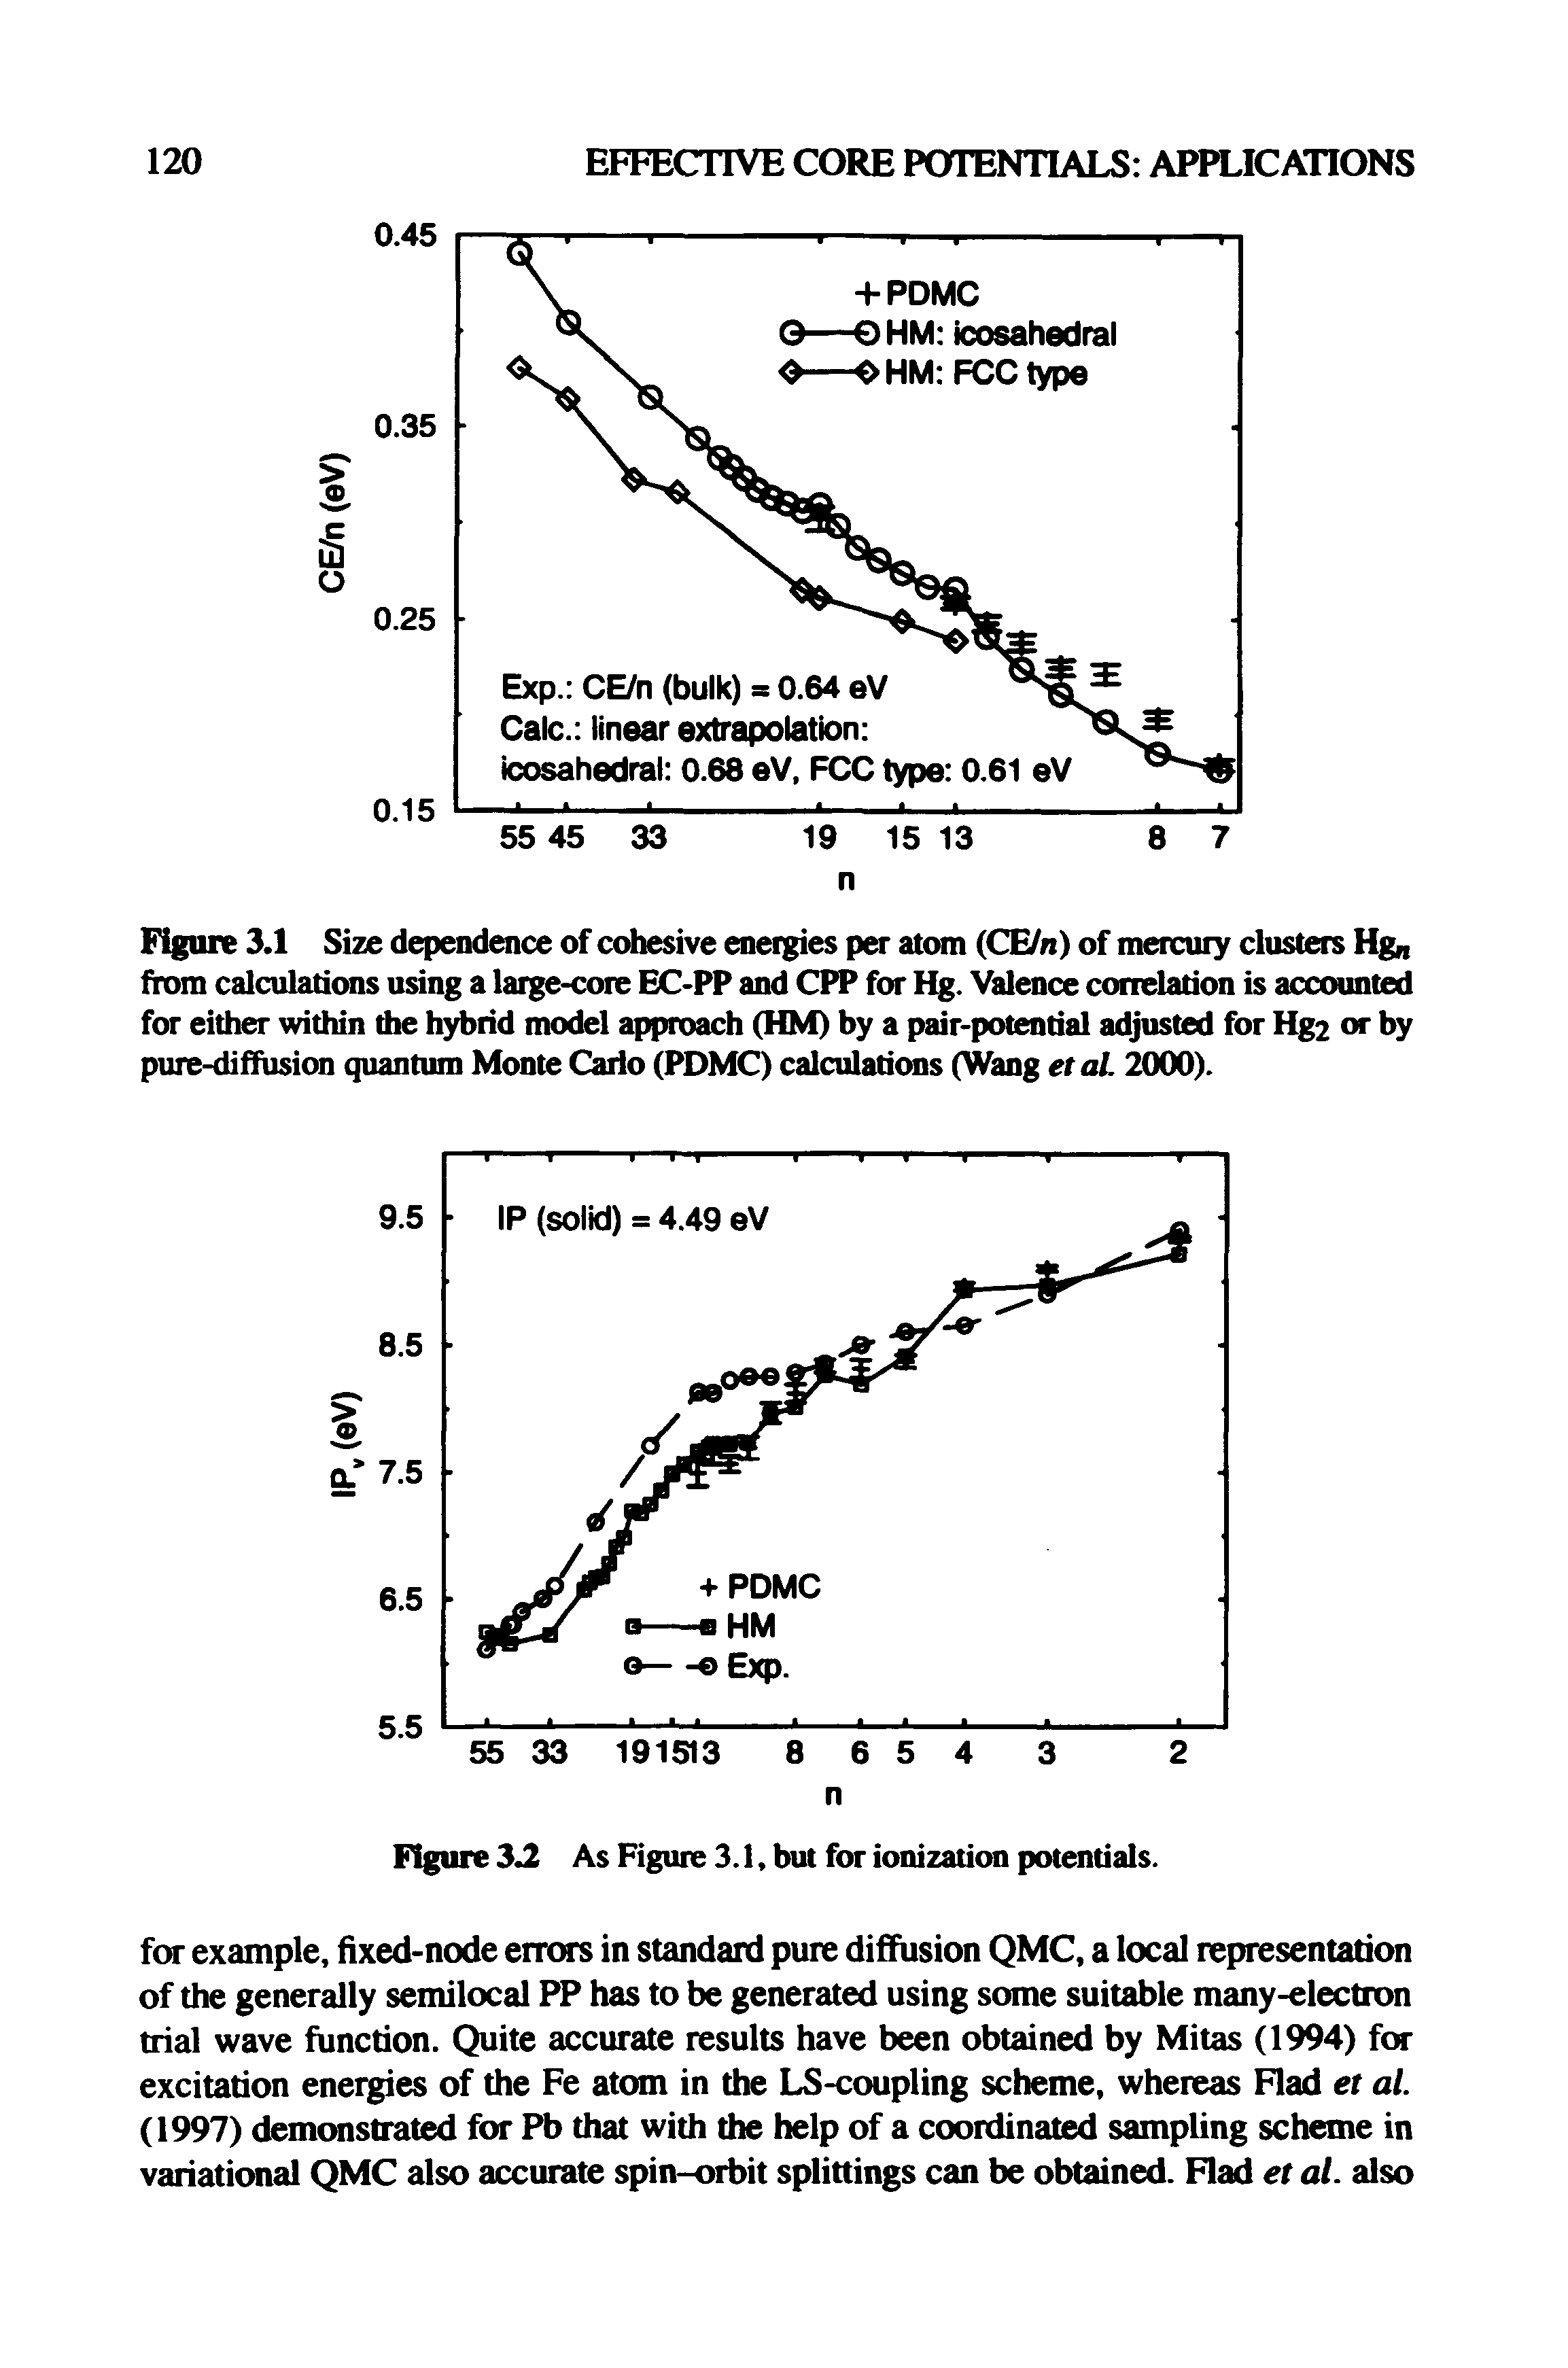 Figure 3.1 Size dependence of cohesive energies per atom (CE/n) of mercury clusters Hgn from calculations using a large-core EC-PP and CPP for Hg. Valence correlation is accounted for either within die hybrid model approach (HM) by a pair-potential adjusted for Hg2 or by pure-diffusion quantum Monte Carlo (PDMC) calculations (Wang etal 2000).